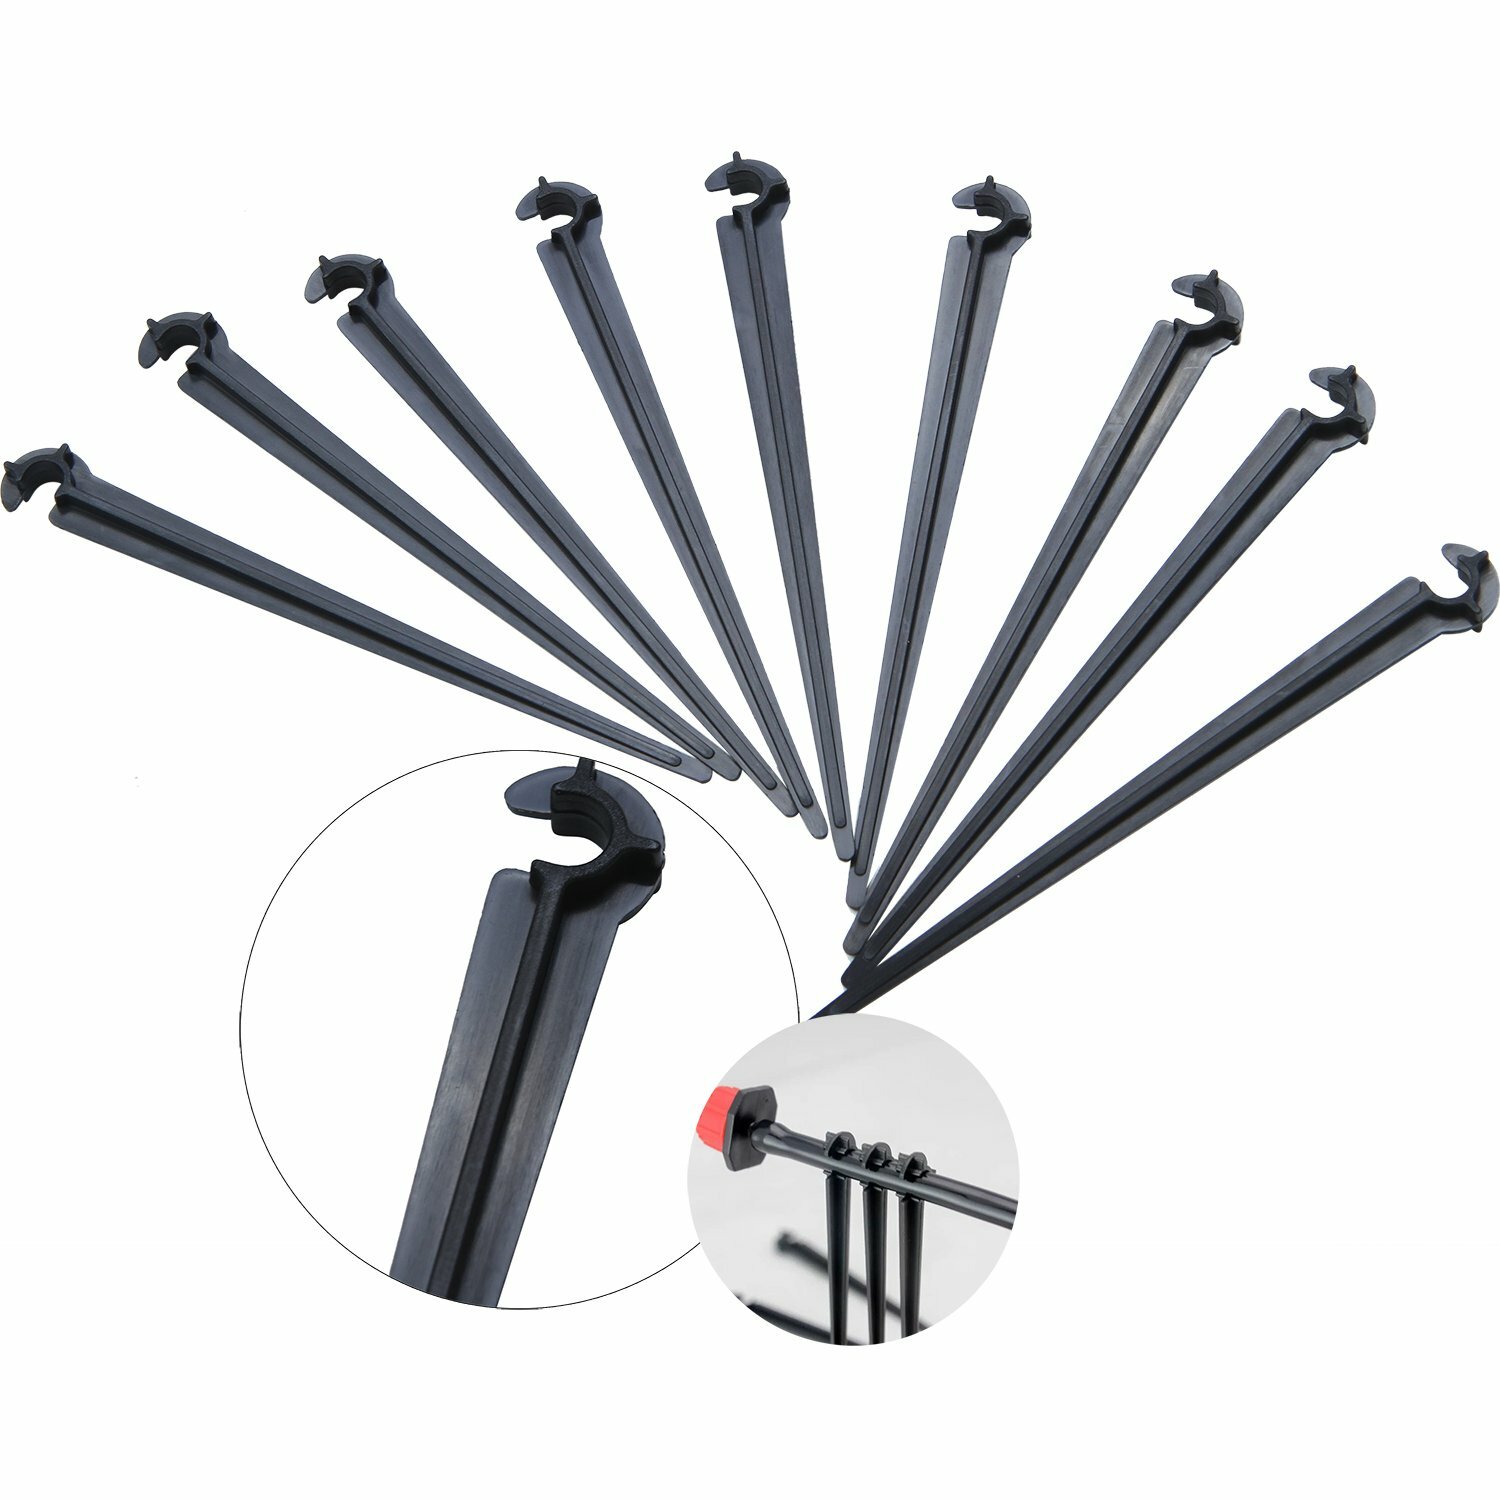 

50Pcs Irrigation Drip Support Stakes 1/4 Inch Tubing Hose Holder for Vegetable Gardens or Flower Beds Water Flow Drip Ir